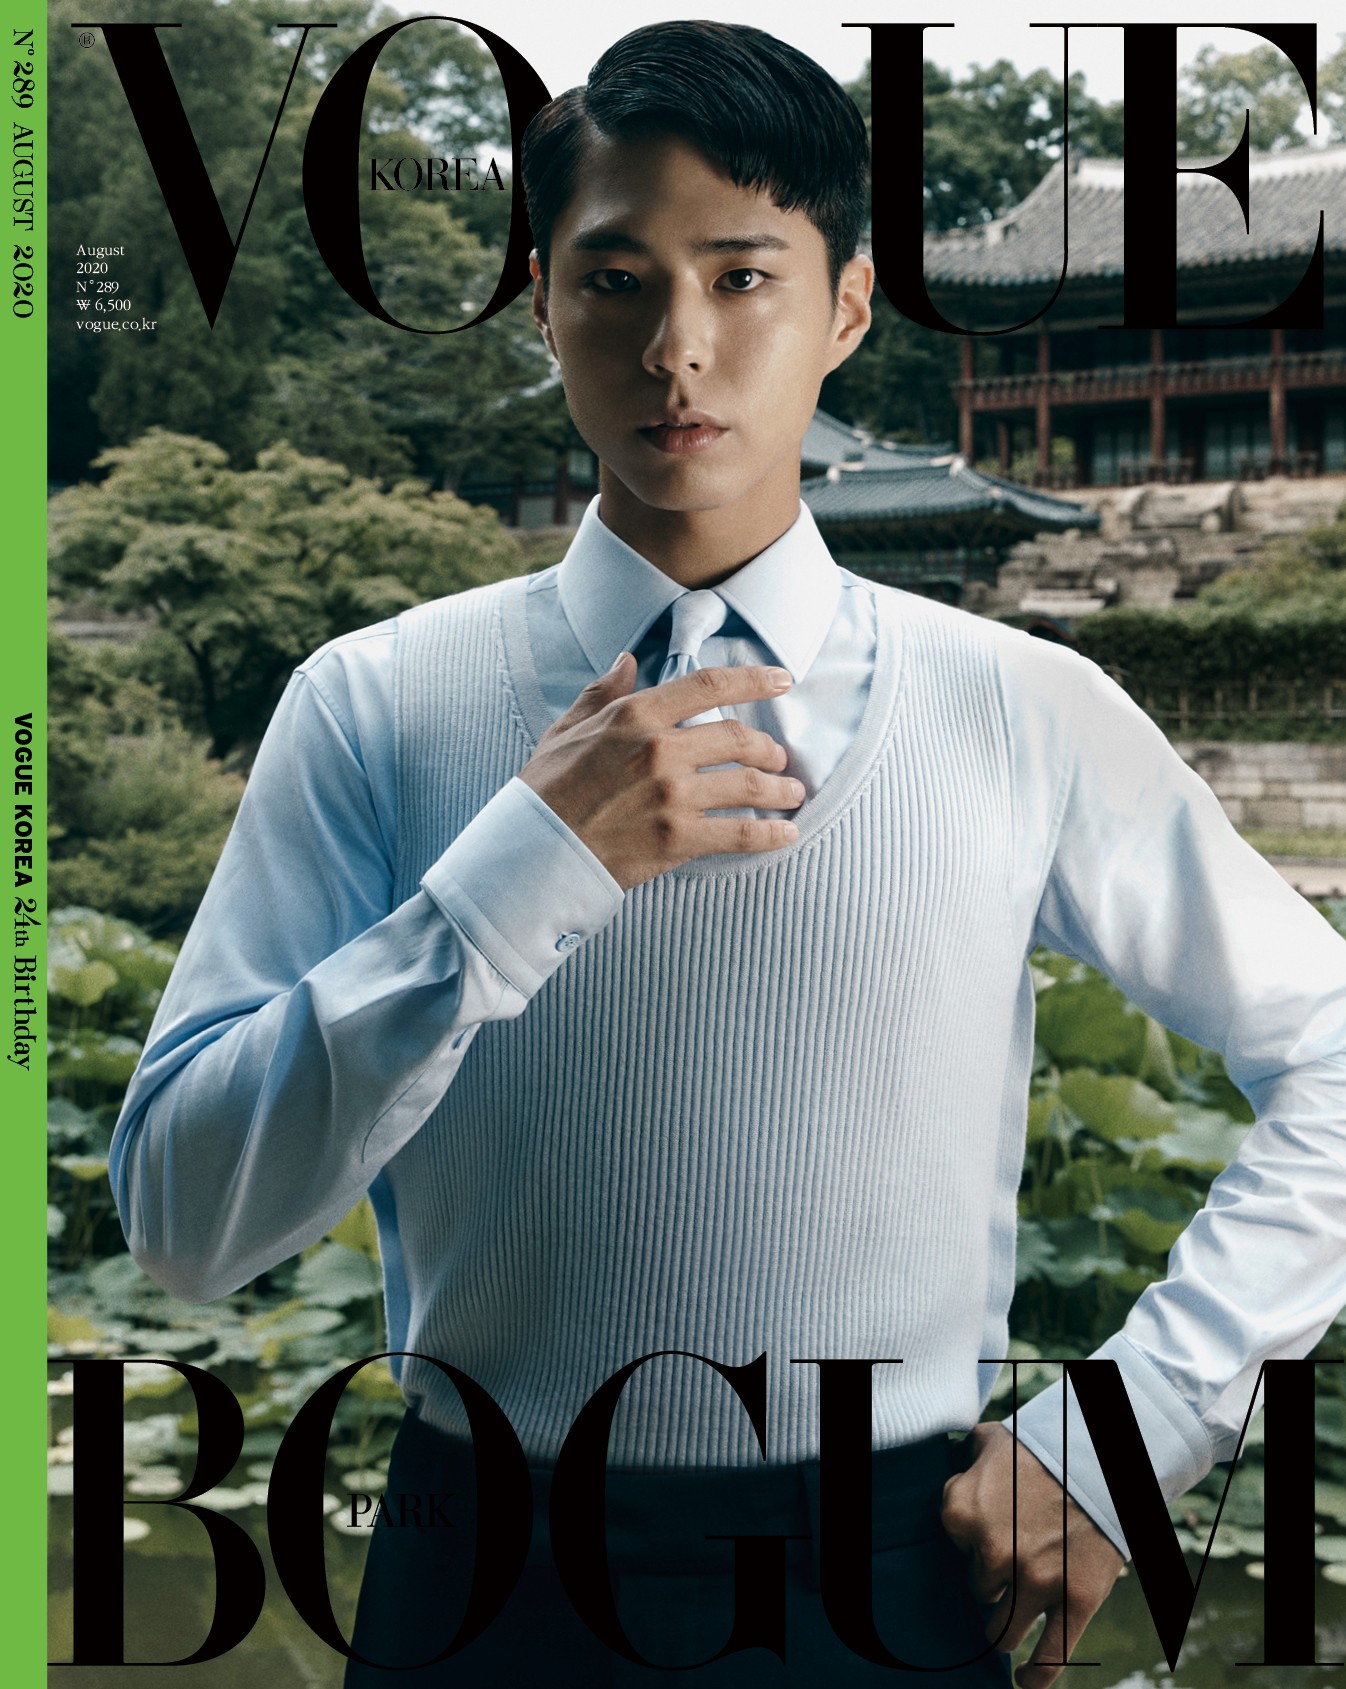 Actor Park Bo-gum has covered the cover of the 24th anniversary of the fashion magazine Vogue Korea.This film, which was held at Changdeokgung, created an emotional visual that seemed to see a movie on the other hand, combining the premiere beauty of the palace and the restrained masculine beauty of Actor Park Bo-gum.Park Bo-gum is said to have maximized the perfection of the picture by overwhelming his gaze with his charisma by freely digesting various styles.In addition, interviews will be published with honest stories about the thoughts and values ​​of twenty-eight Park Bo-gum.According to the official, Park Bo-gum Actors proposal to promote the beauty of Korea has made me shoot at Changdeokgung. Park Bo-gum is a warm and caring inner owner, but he is more cool professional than anyone else in his work. The interview with the picture of Vogue Korea was confirmed in Korea, Taiwan, Thailand, Hong Kong edition Vogue and Chinese edition Vogue ME, and proved the power of Park Bo-gum, which captivated Asia.The August issue, which includes interviews with the pictures of Park Bo-gum Actor, will be published on the 20th.